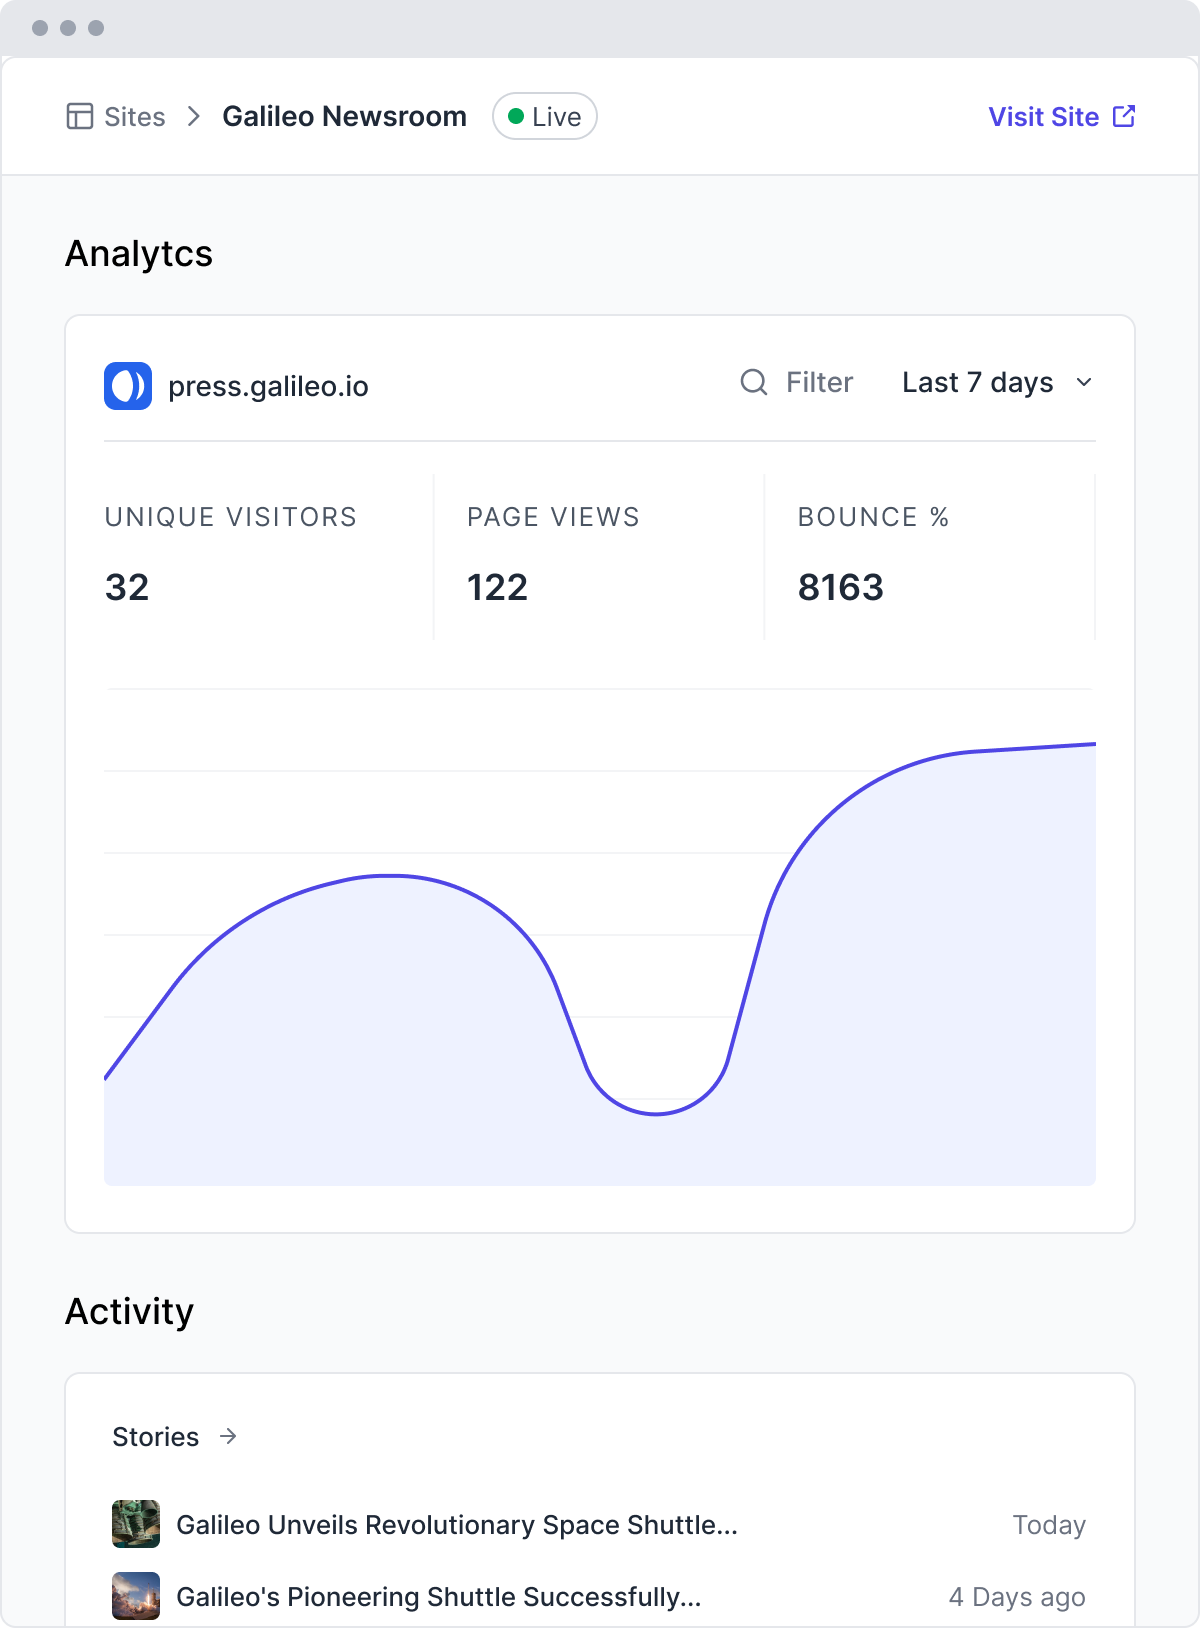 Real-time analytics to help you *earn more coverage*